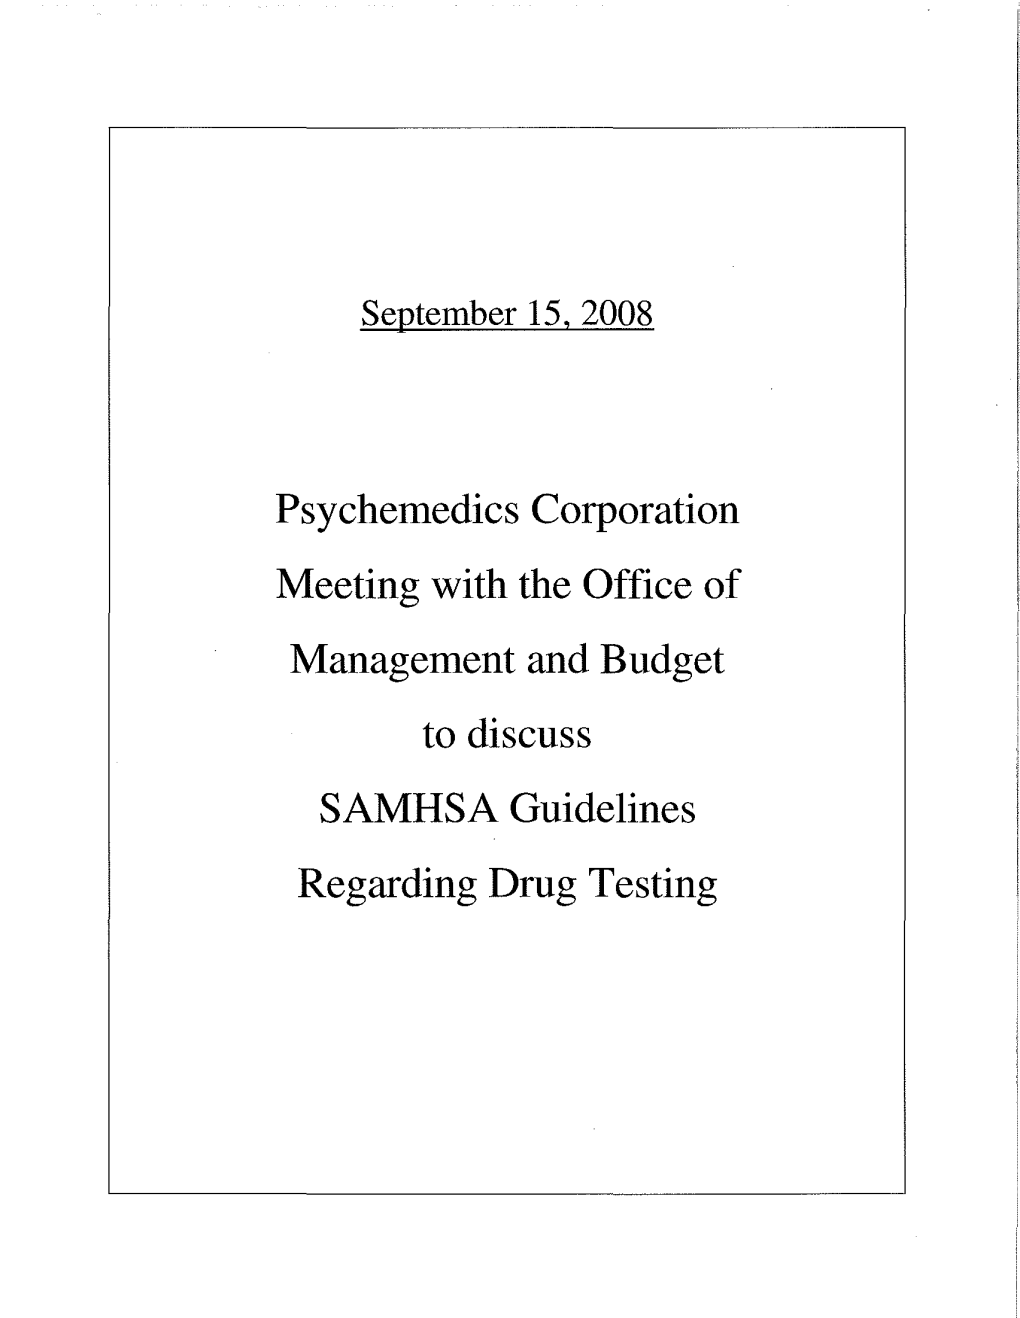 Psychemedics Corporation Meeting with the Office of Management and Budget to Discuss SAMHSA Guidelines Regarding Drug Testing Index